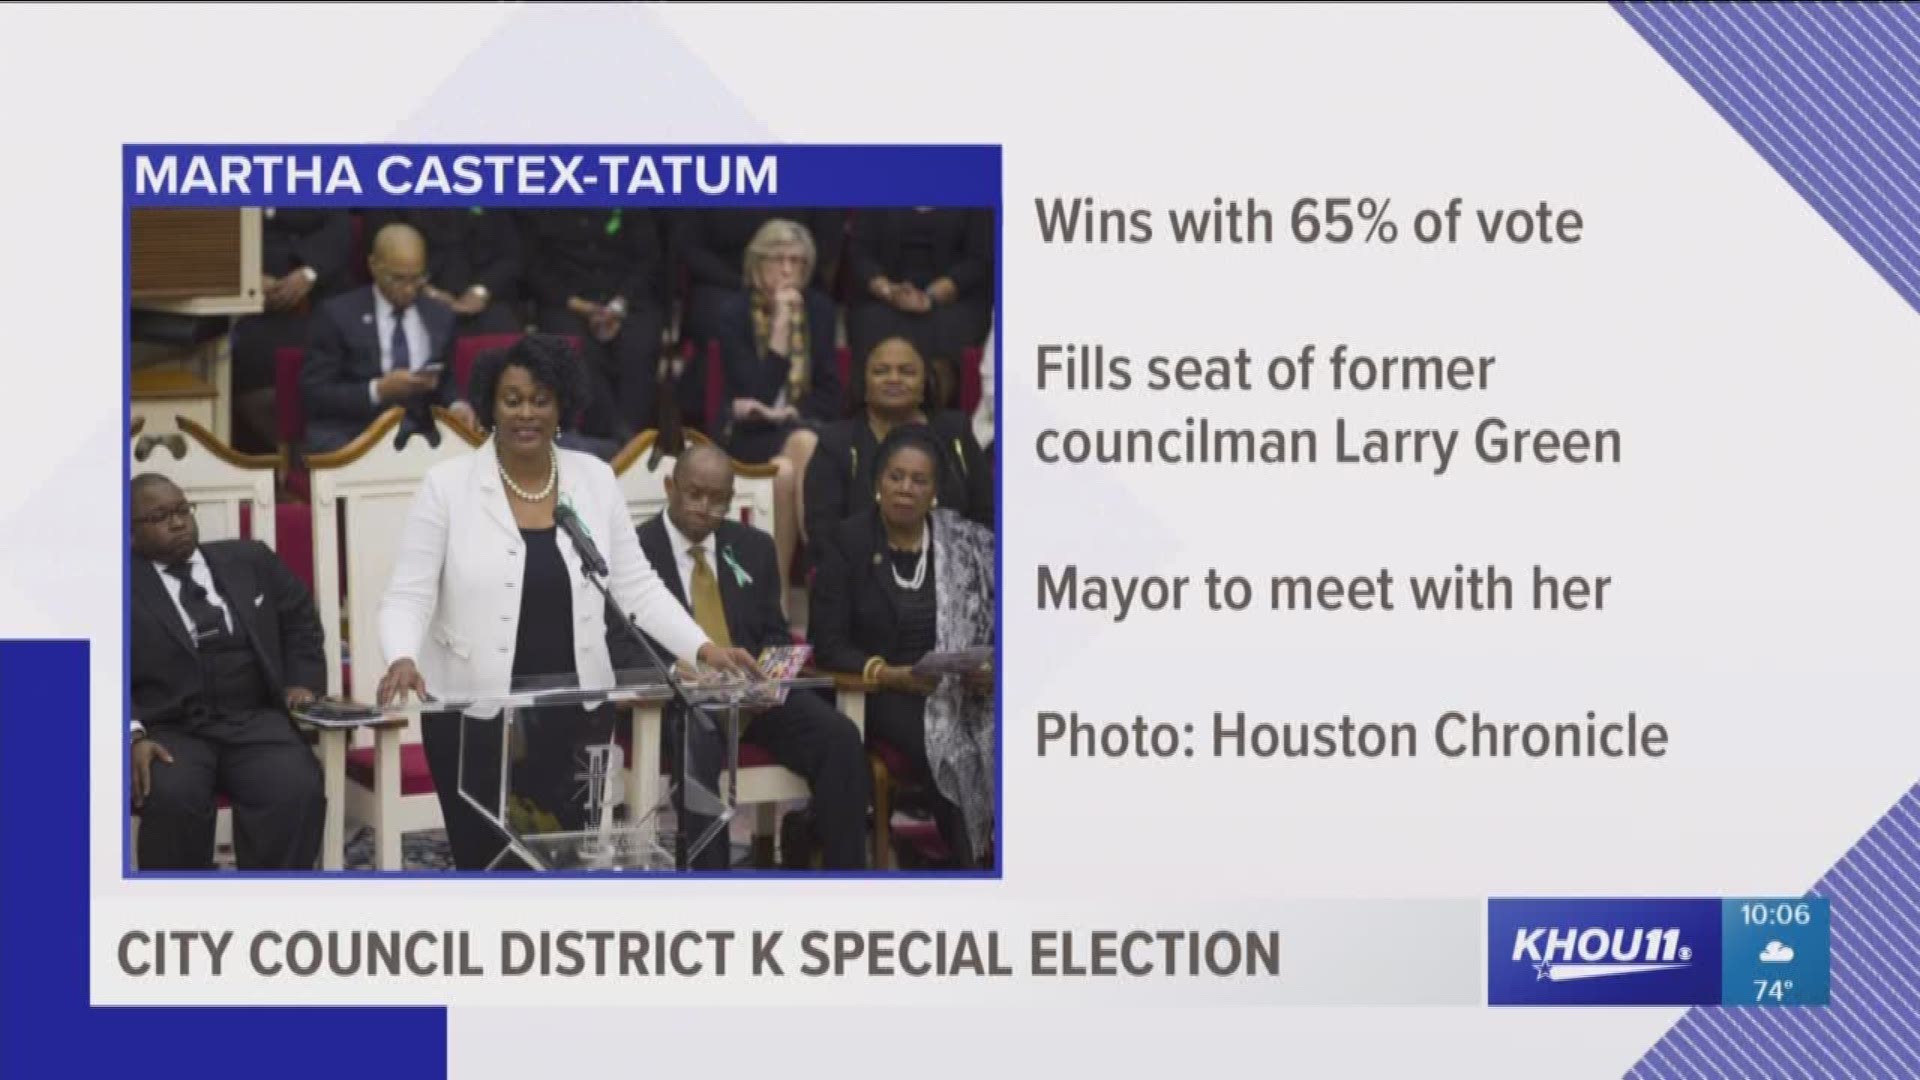 The special election deciding who fills the district seat of late Houston councilman Larry Green shows Martha Castex-Tatum taking an overwhelming victory with more than 65 percent of the vote.